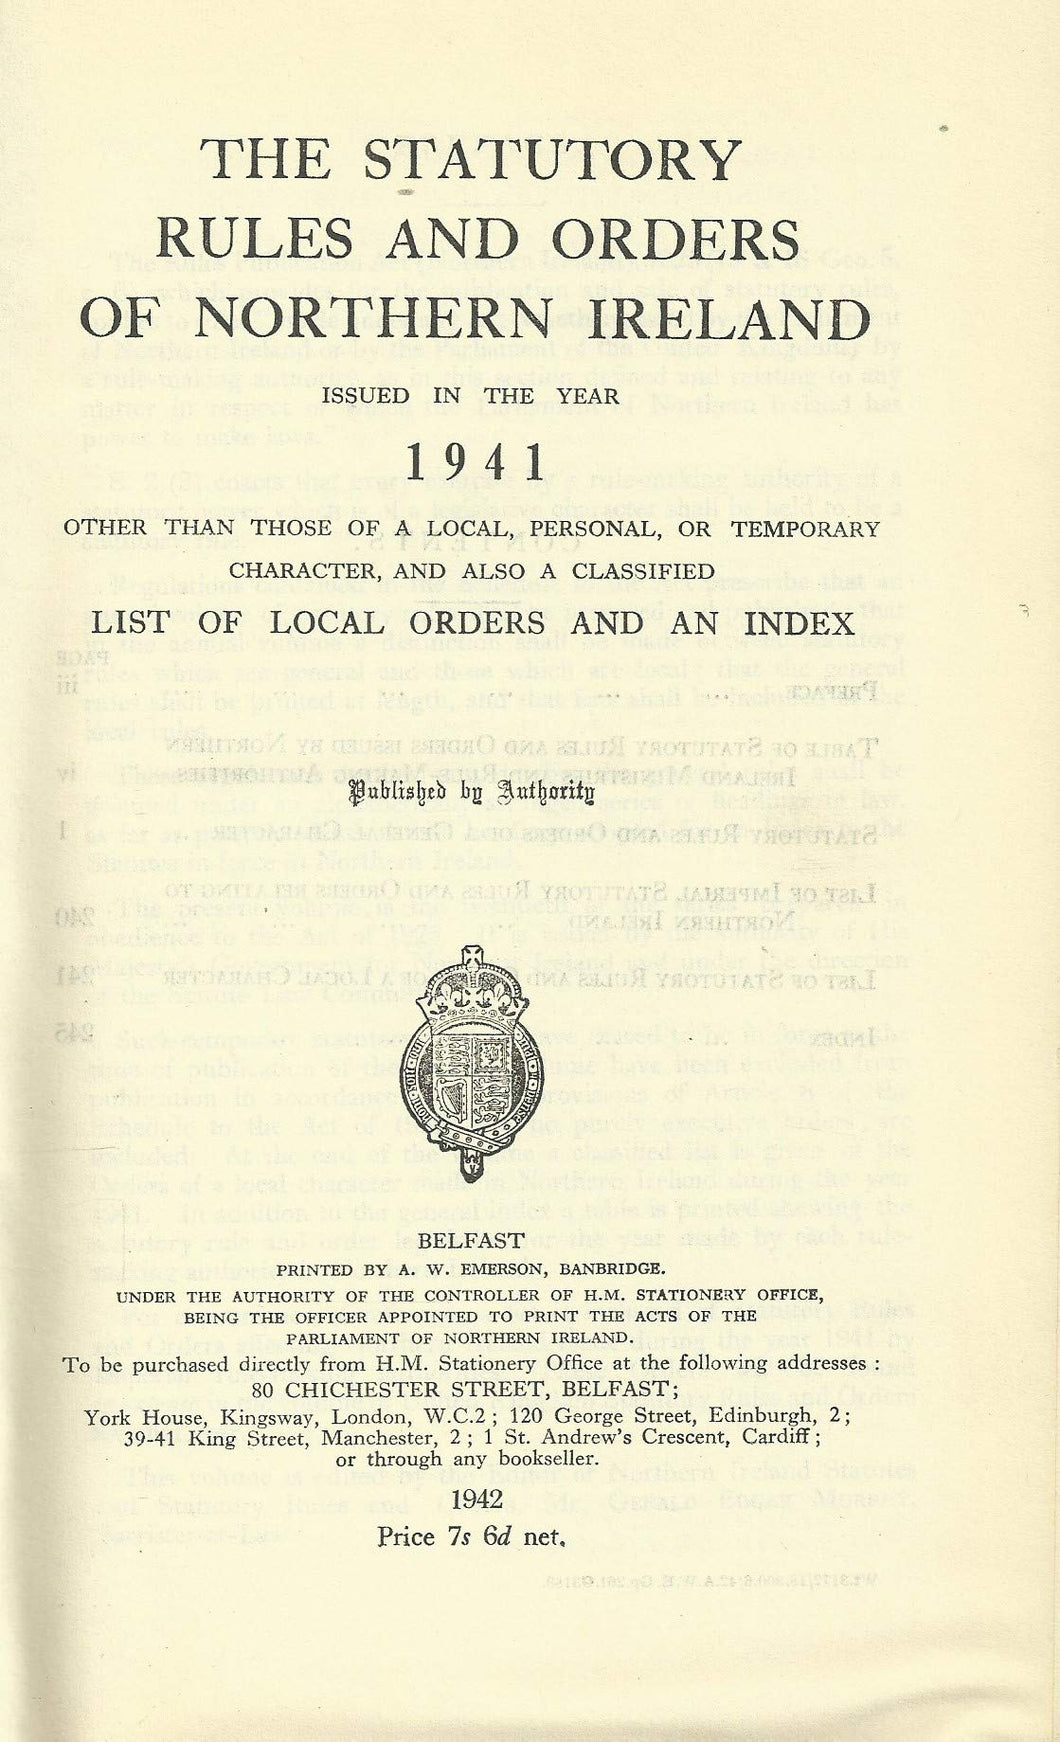 Northern Ireland Statutory Rules and Orders, 1941 - The Statutory Rules and Orders of Northern Ireland